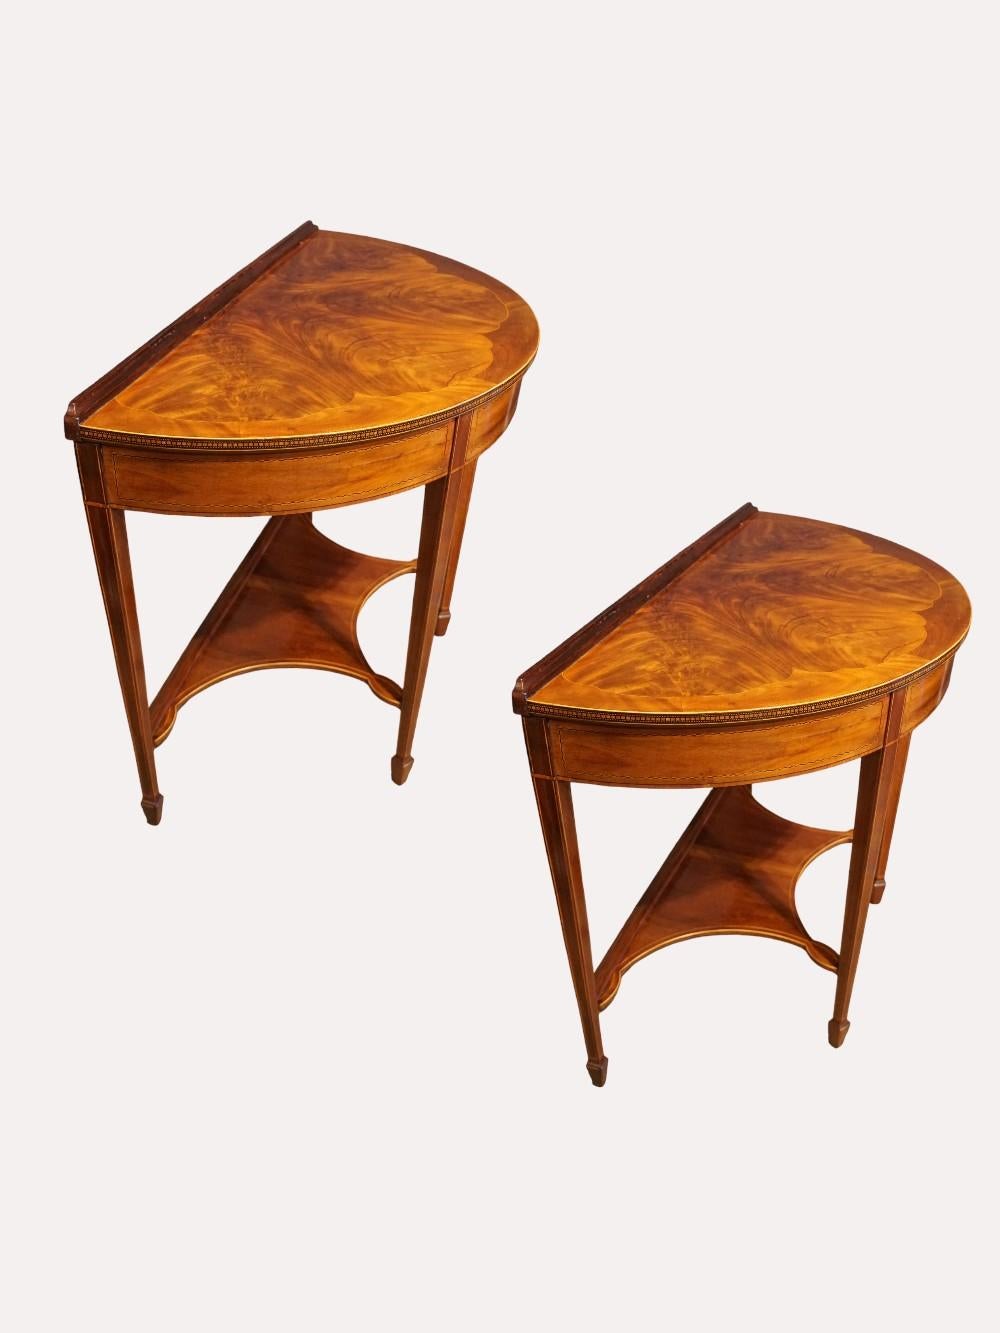 English Pair of Edwardian mahogany demi lune console tables